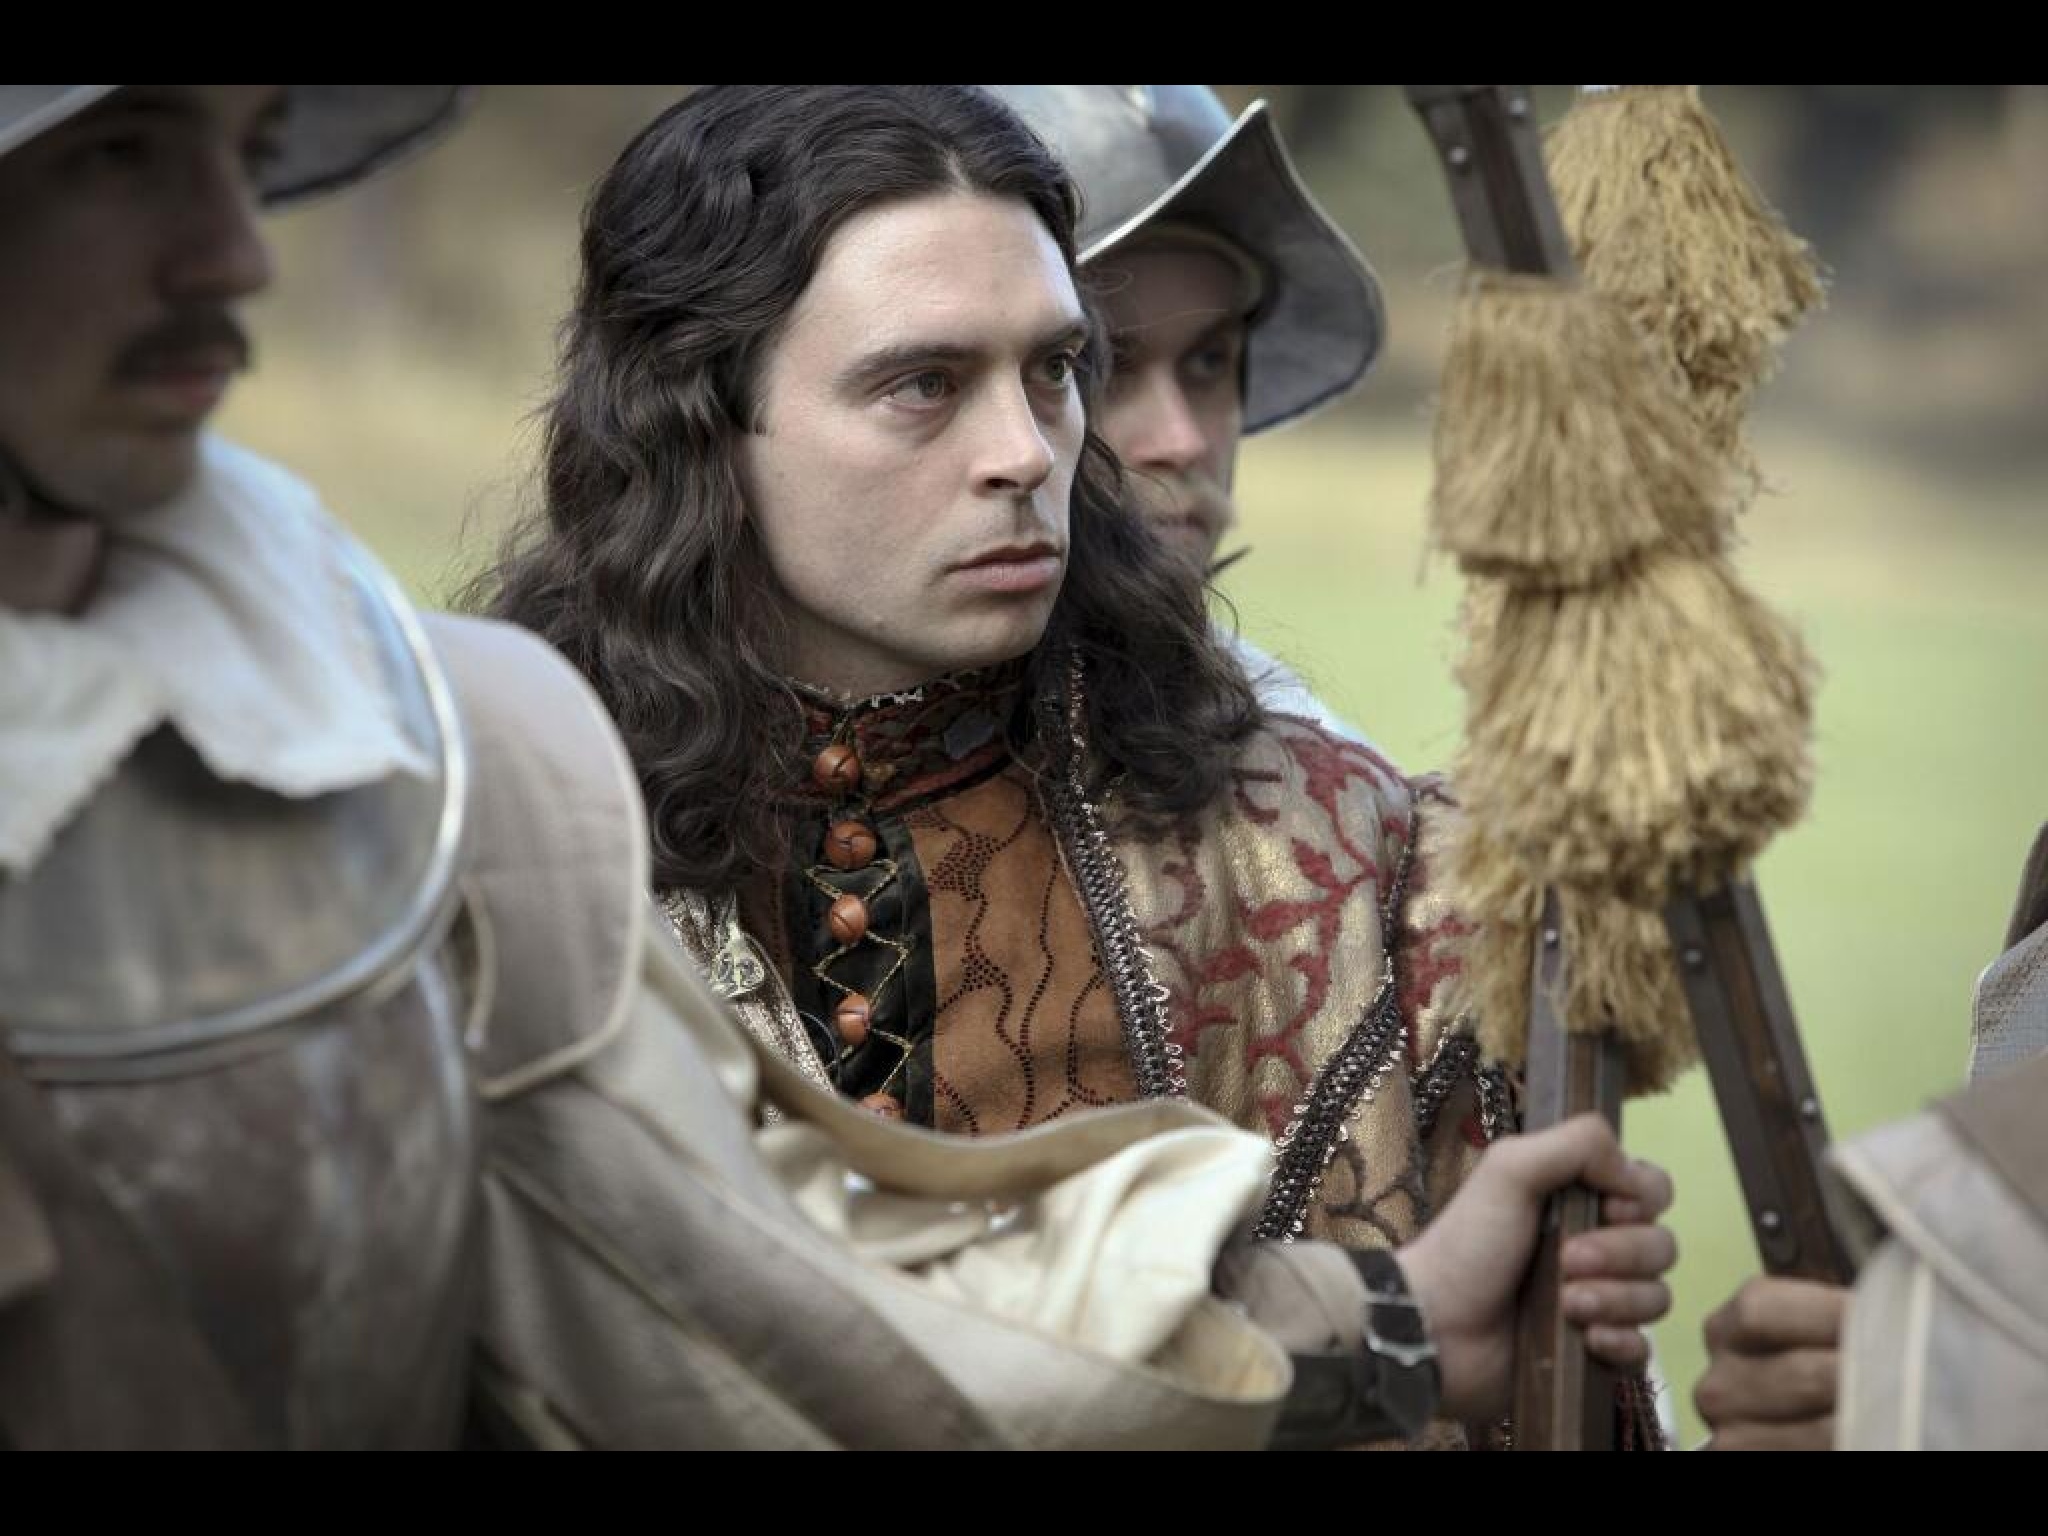 Ryan Gage as Louis XIII in The Musketeers